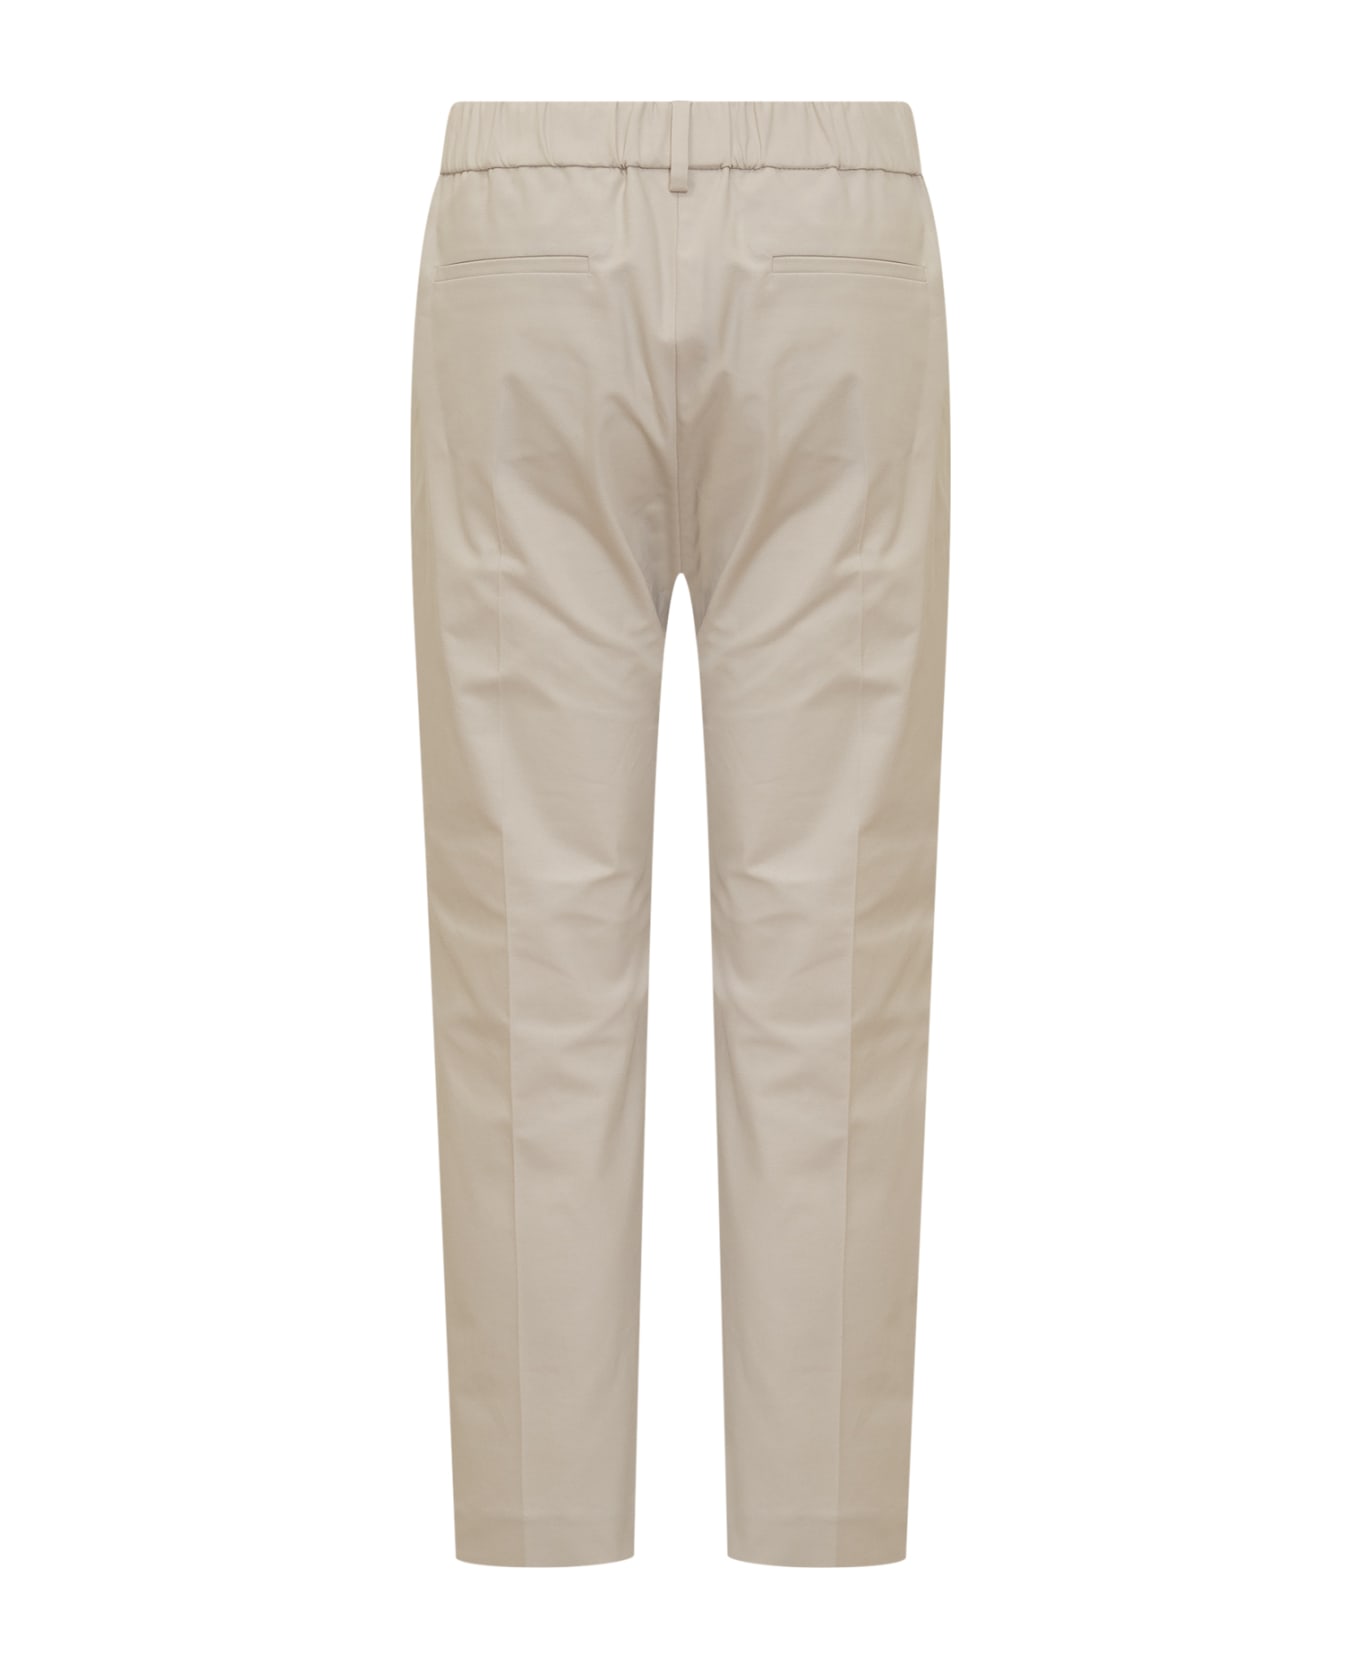 Brunello Cucinelli Stretch Cotton Trousers With Elastic Waistband And Small Pleats On The Front - AVENA ボトムス